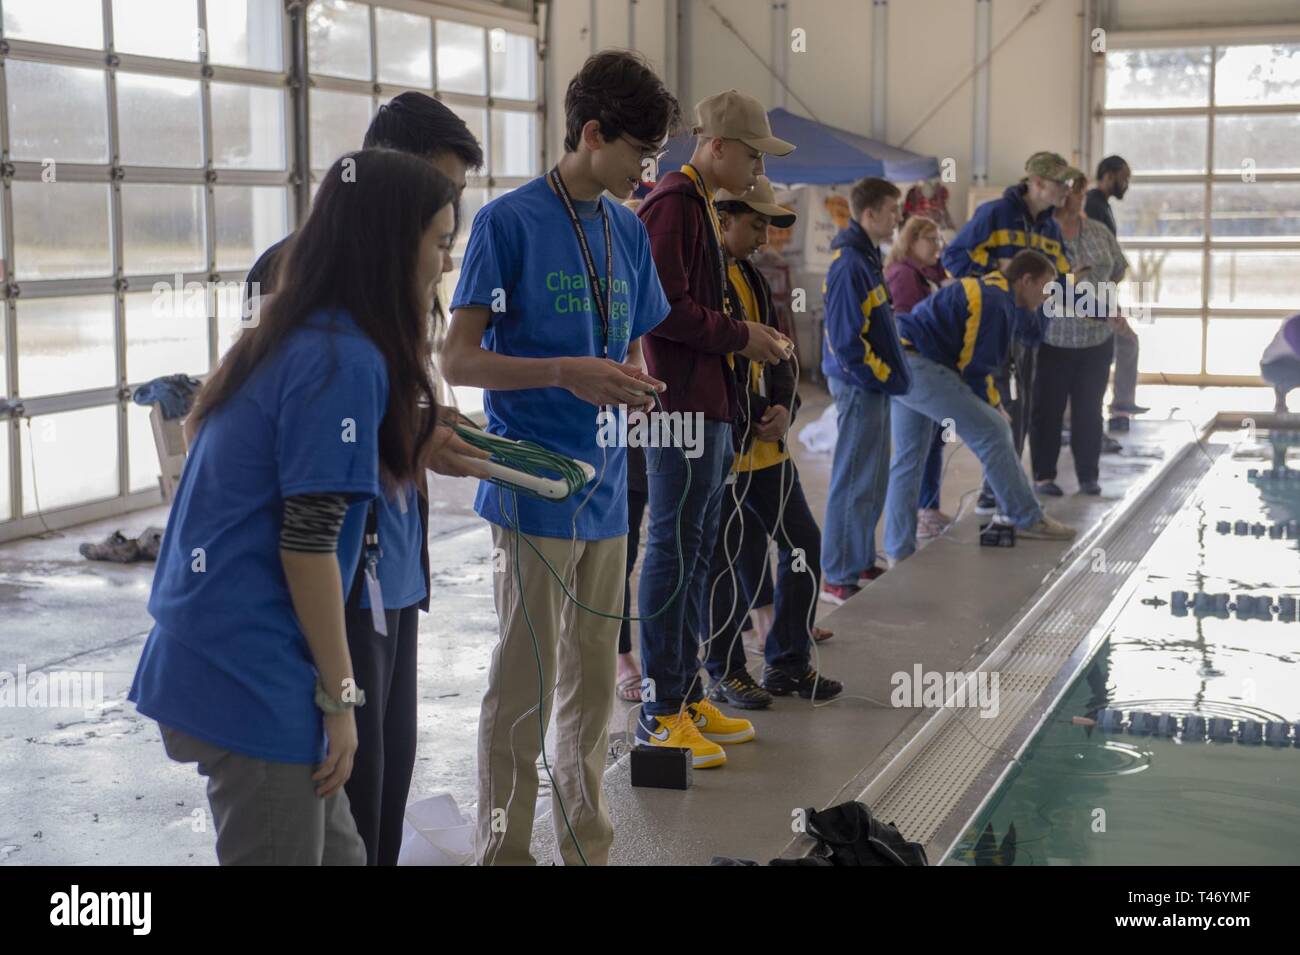 CHARLESTON, S.C. (March 13, 2019) Participating teams compete during the SeaPerch Charleston Challenge at Danny Jones Recreation Complex during Charleston Navy Week, March 13. The Navy Week program serves as the Navy's principal outreach effort in areas of the country without a significant Navy presence. Stock Photo